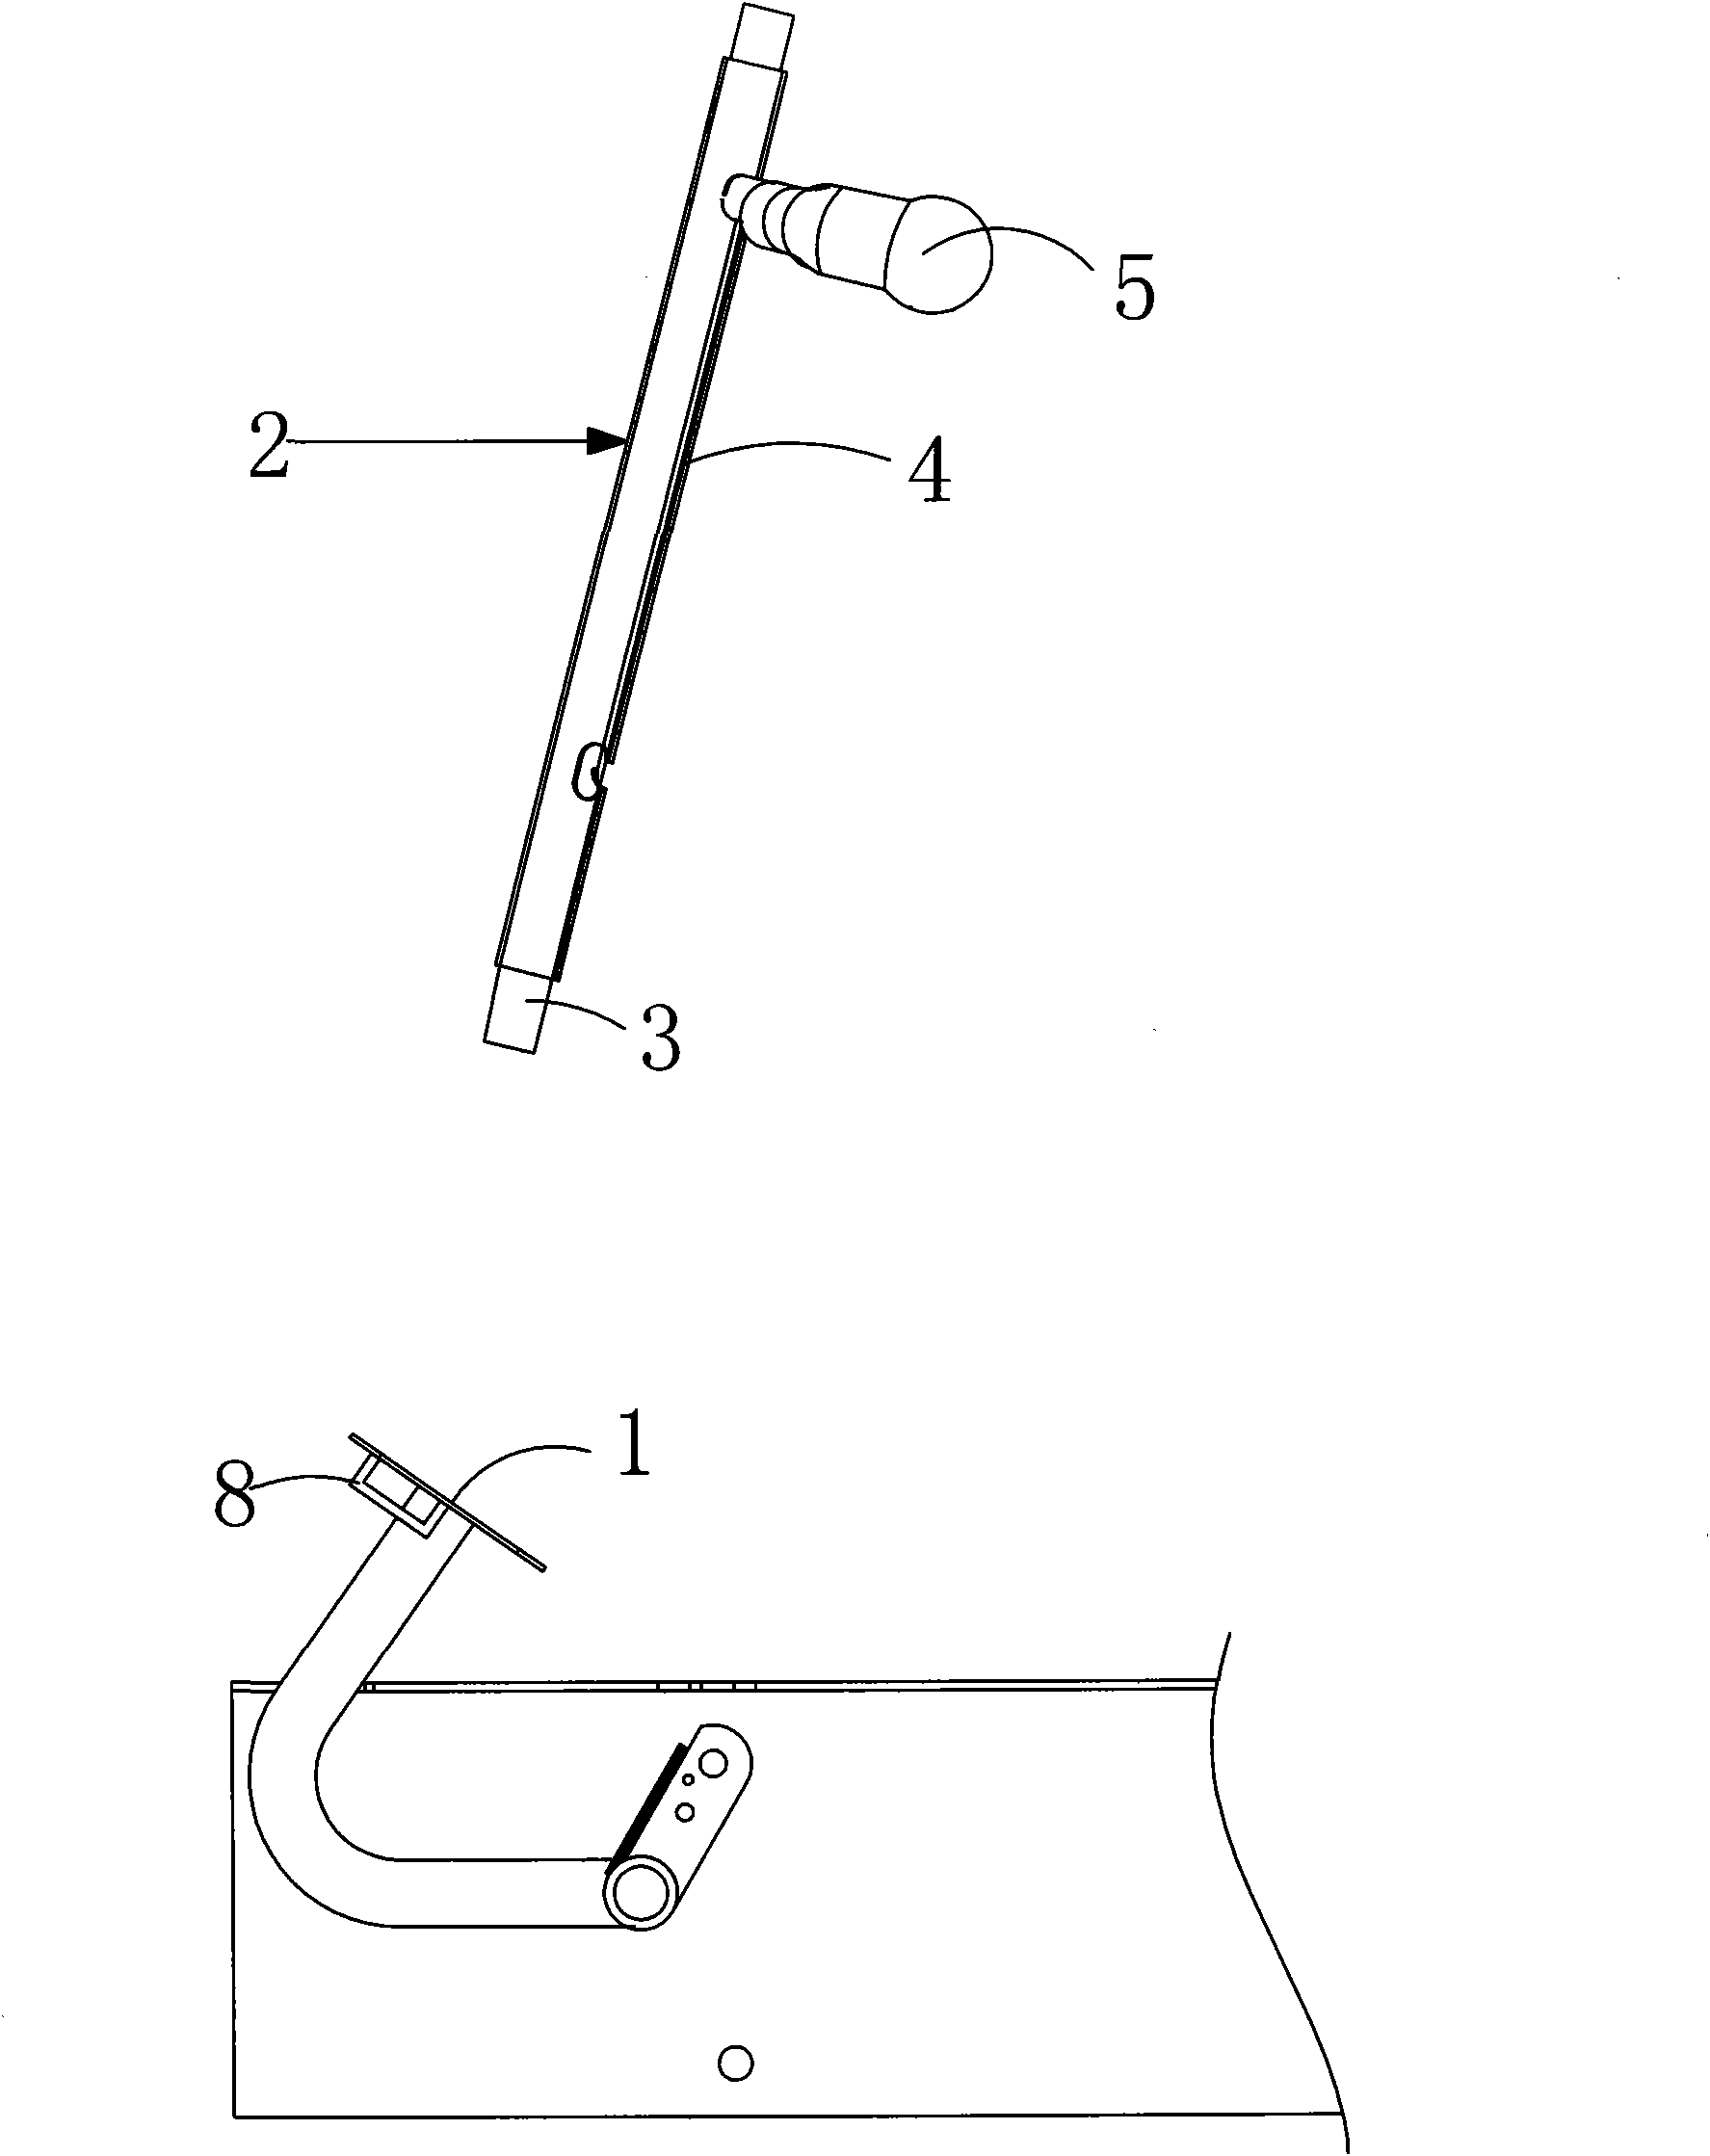 Improvement on brake system of four-wheel electric/foot-operated dual-mode vehicle